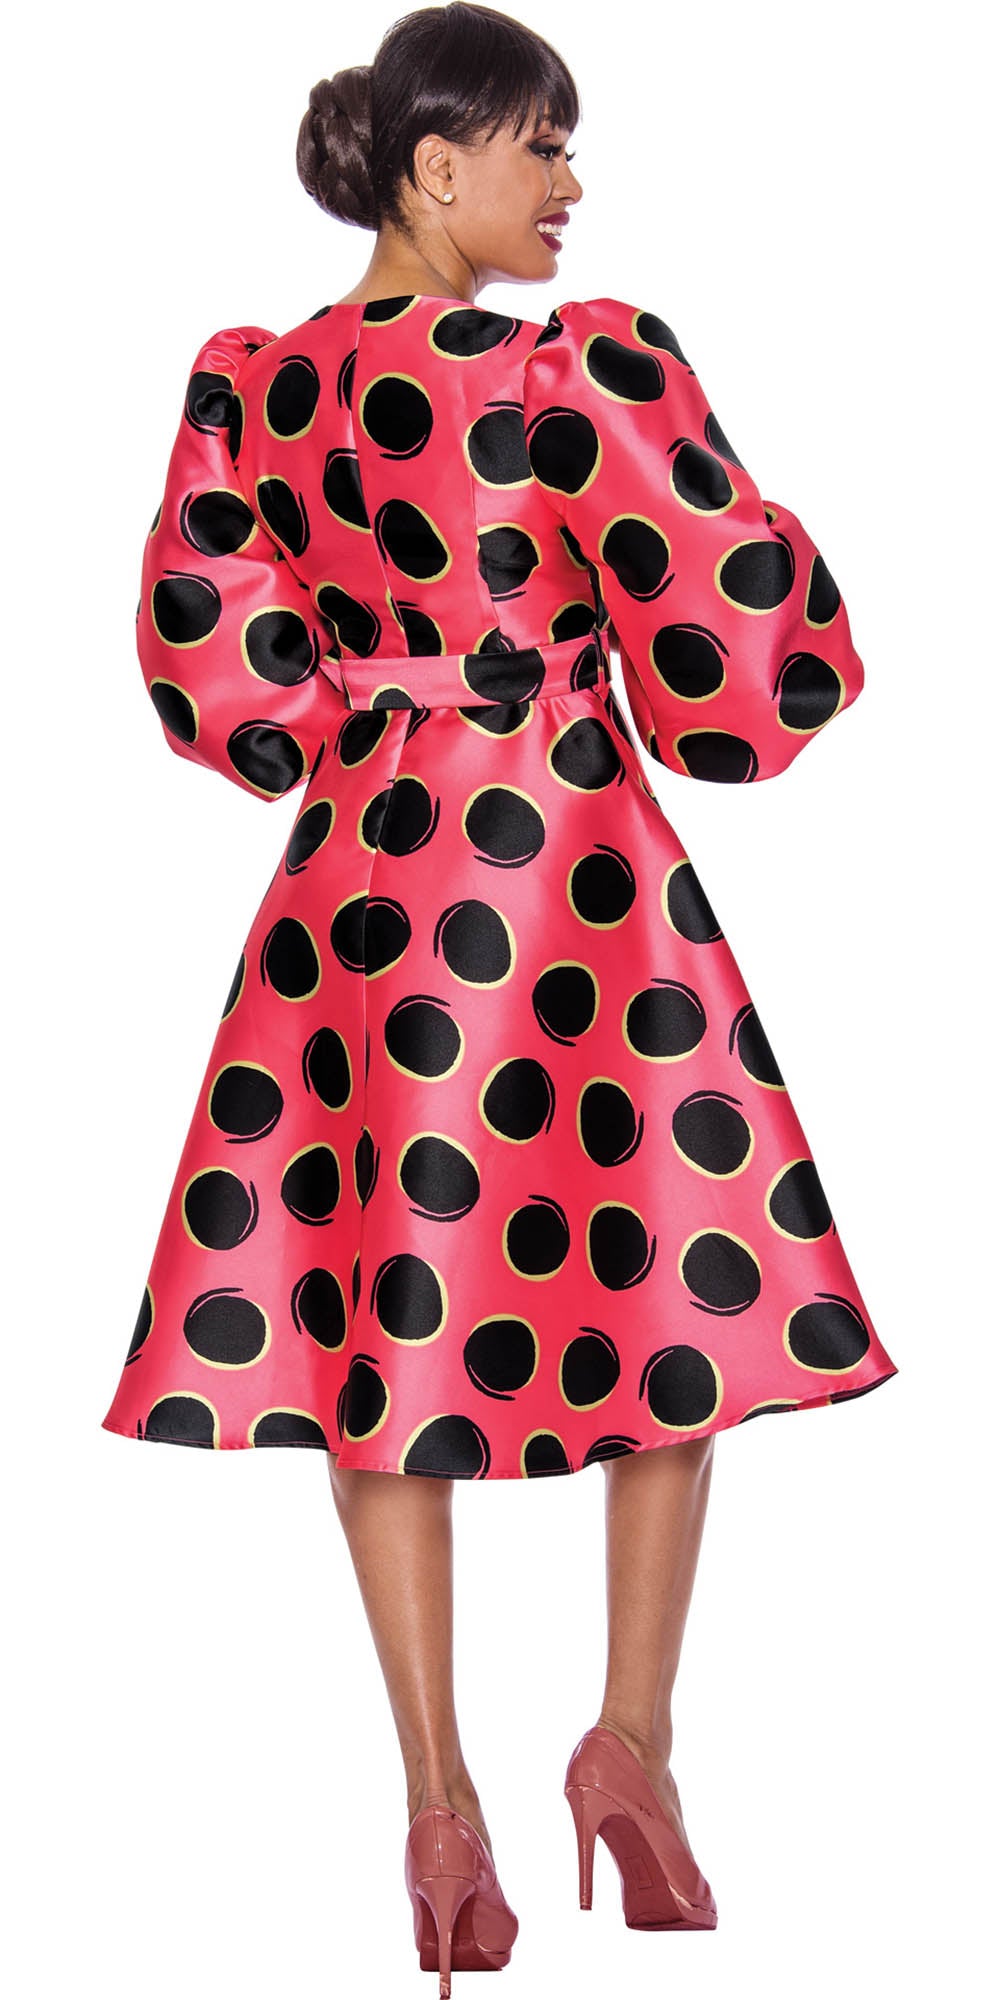 Dresses by Nubiano - 12031 - Multi - Belted Dot Print Dress